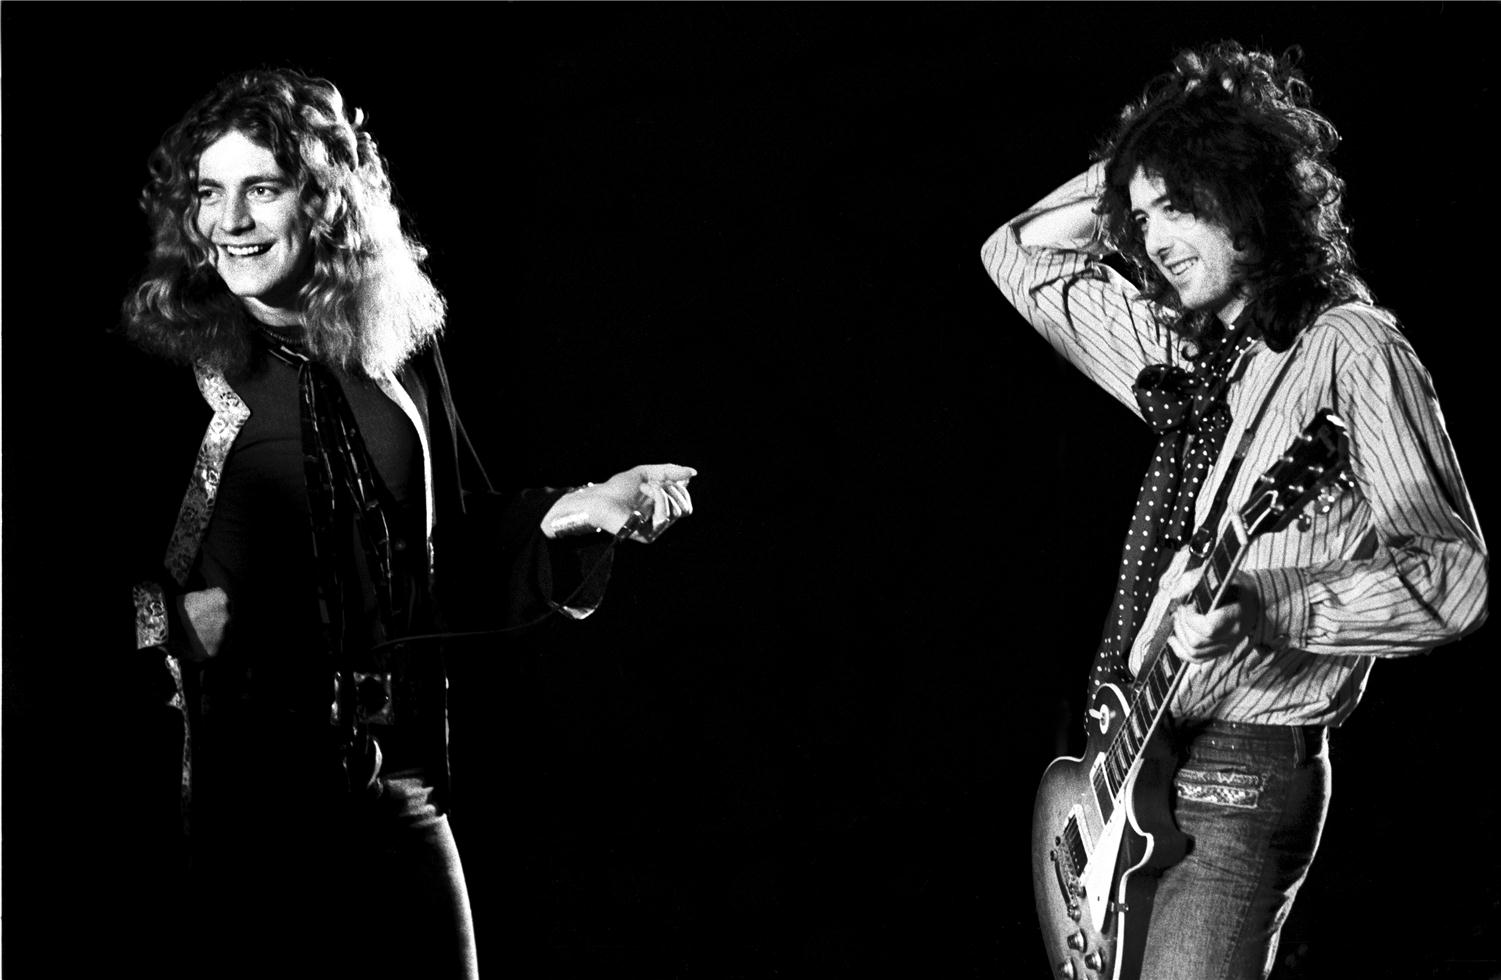 Robert Plant And Jimmy Page, Led Zeppelin, Minneapolis, - Jimmy Page - HD Wallpaper 